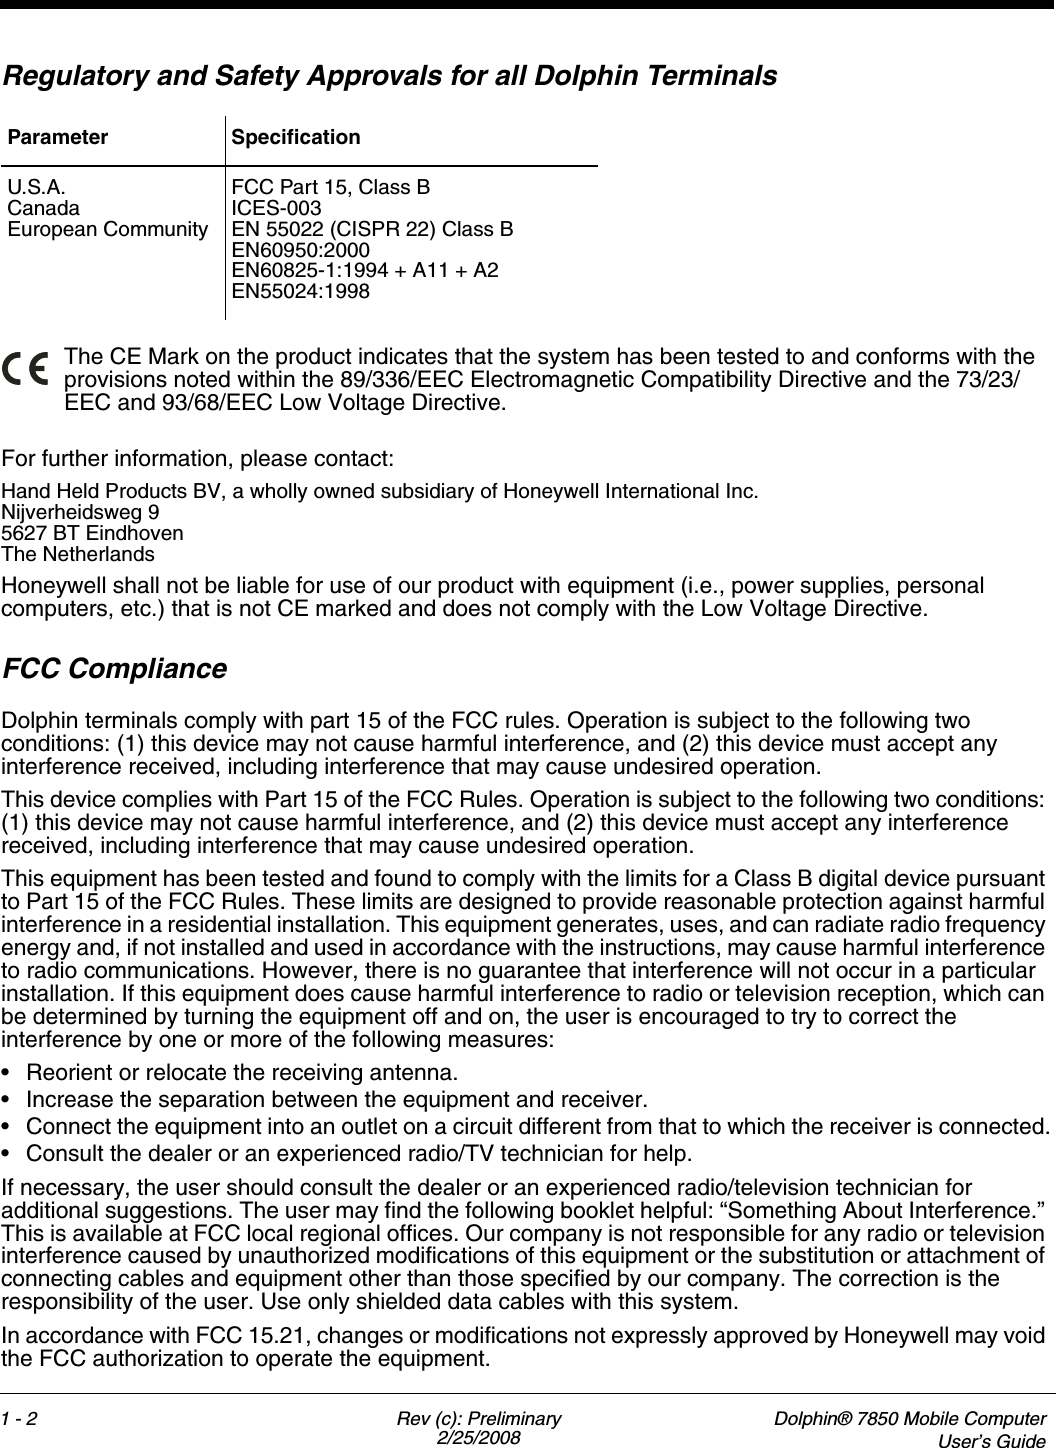 1 - 2 Rev (c): Preliminary2/25/2008Dolphin® 7850 Mobile ComputerUser’s GuideRegulatory and Safety Approvals for all Dolphin Terminals The CE Mark on the product indicates that the system has been tested to and conforms with the provisions noted within the 89/336/EEC Electromagnetic Compatibility Directive and the 73/23/EEC and 93/68/EEC Low Voltage Directive.For further information, please contact:Hand Held Products BV, a wholly owned subsidiary of Honeywell International Inc.Nijverheidsweg 95627 BT EindhovenThe NetherlandsHoneywell shall not be liable for use of our product with equipment (i.e., power supplies, personal computers, etc.) that is not CE marked and does not comply with the Low Voltage Directive.FCC Compliance Dolphin terminals comply with part 15 of the FCC rules. Operation is subject to the following two conditions: (1) this device may not cause harmful interference, and (2) this device must accept any interference received, including interference that may cause undesired operation.This device complies with Part 15 of the FCC Rules. Operation is subject to the following two conditions: (1) this device may not cause harmful interference, and (2) this device must accept any interference received, including interference that may cause undesired operation.This equipment has been tested and found to comply with the limits for a Class B digital device pursuant to Part 15 of the FCC Rules. These limits are designed to provide reasonable protection against harmful interference in a residential installation. This equipment generates, uses, and can radiate radio frequency energy and, if not installed and used in accordance with the instructions, may cause harmful interference to radio communications. However, there is no guarantee that interference will not occur in a particular installation. If this equipment does cause harmful interference to radio or television reception, which can be determined by turning the equipment off and on, the user is encouraged to try to correct the interference by one or more of the following measures:• Reorient or relocate the receiving antenna.• Increase the separation between the equipment and receiver.• Connect the equipment into an outlet on a circuit different from that to which the receiver is connected.• Consult the dealer or an experienced radio/TV technician for help.If necessary, the user should consult the dealer or an experienced radio/television technician for additional suggestions. The user may find the following booklet helpful: “Something About Interference.” This is available at FCC local regional offices. Our company is not responsible for any radio or television interference caused by unauthorized modifications of this equipment or the substitution or attachment of connecting cables and equipment other than those specified by our company. The correction is the responsibility of the user. Use only shielded data cables with this system.In accordance with FCC 15.21, changes or modifications not expressly approved by Honeywell may void the FCC authorization to operate the equipment.Parameter SpecificationU.S.A.CanadaEuropean CommunityFCC Part 15, Class BICES-003EN 55022 (CISPR 22) Class BEN60950:2000EN60825-1:1994 + A11 + A2EN55024:1998